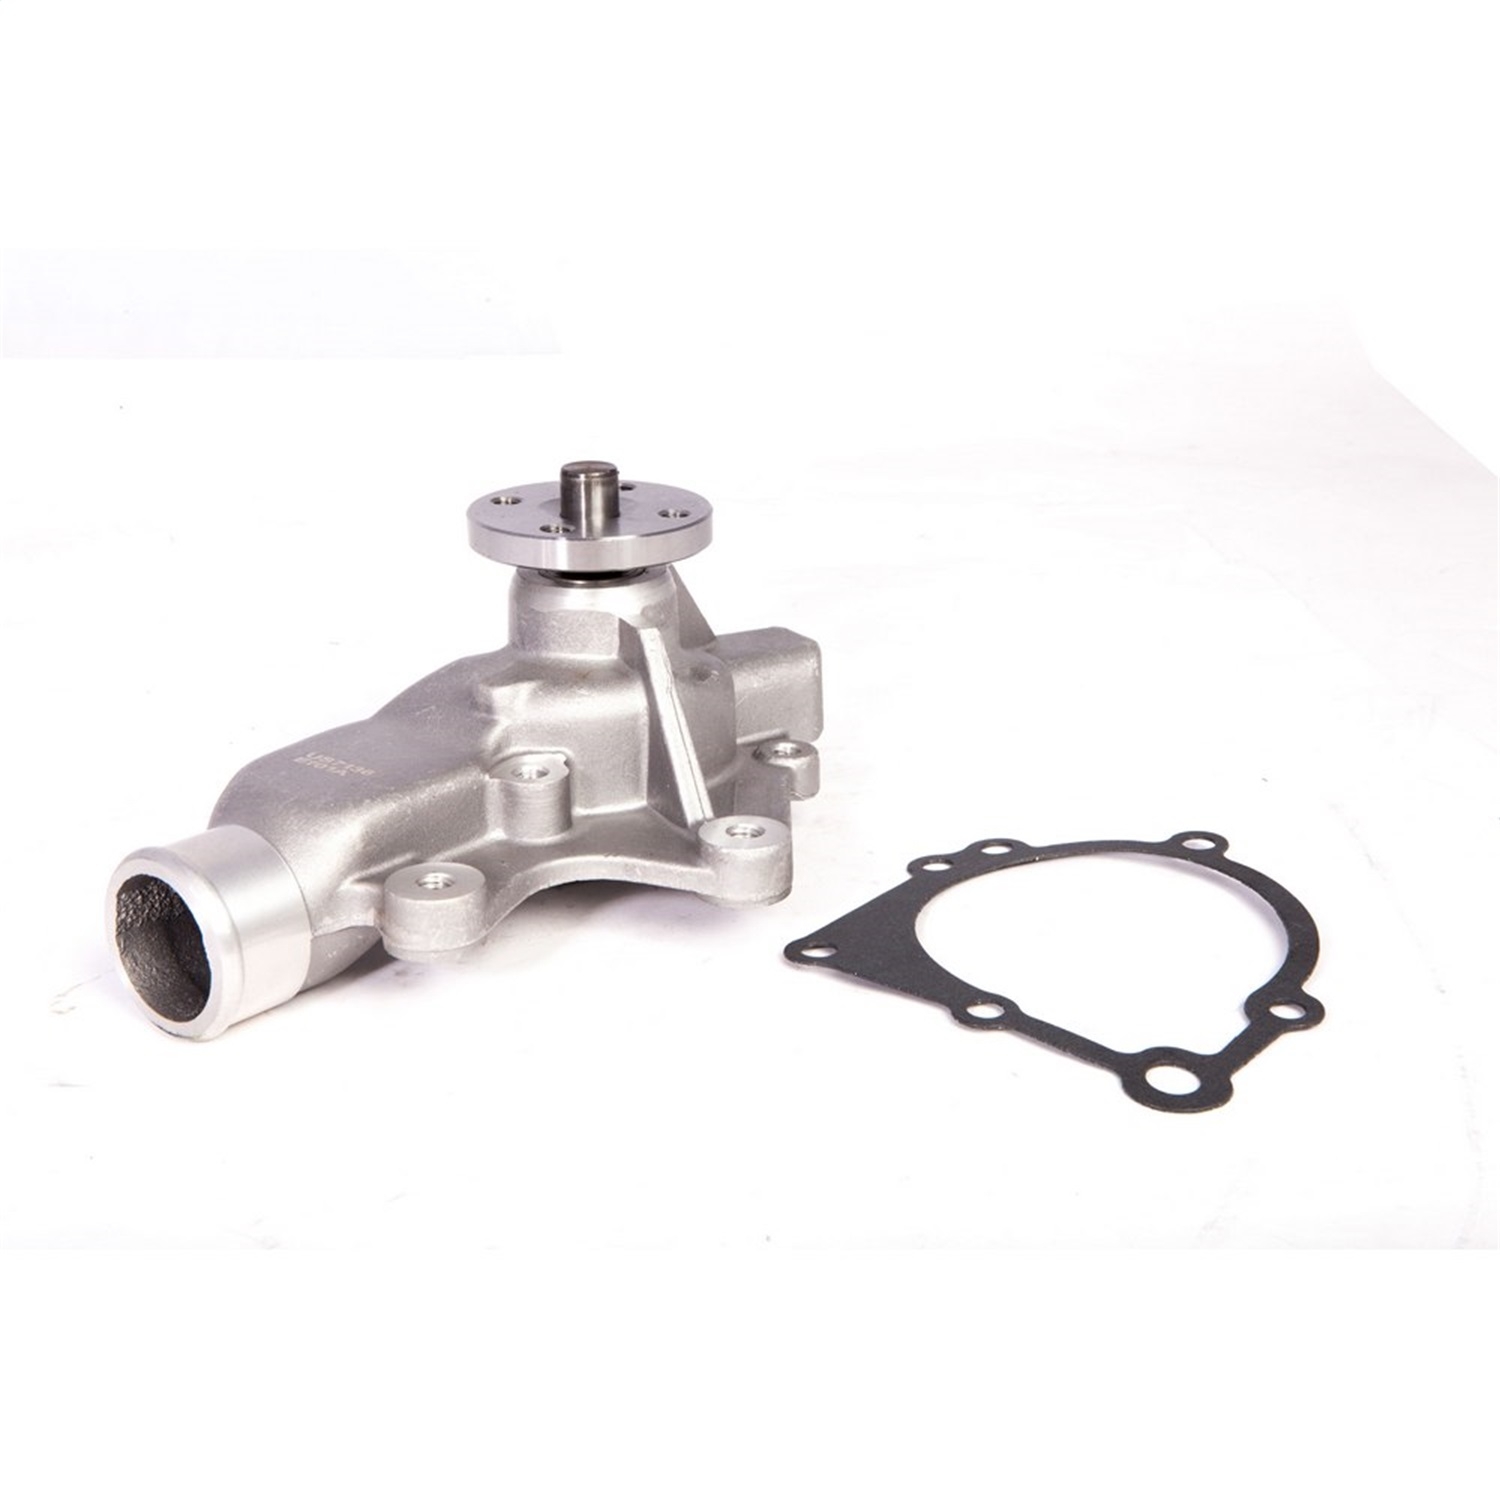 Omix This Water Pump From Omix Fits 91-00 Jeep Cherokee, 91-01 Wrangler With A 2.5L, 91-99